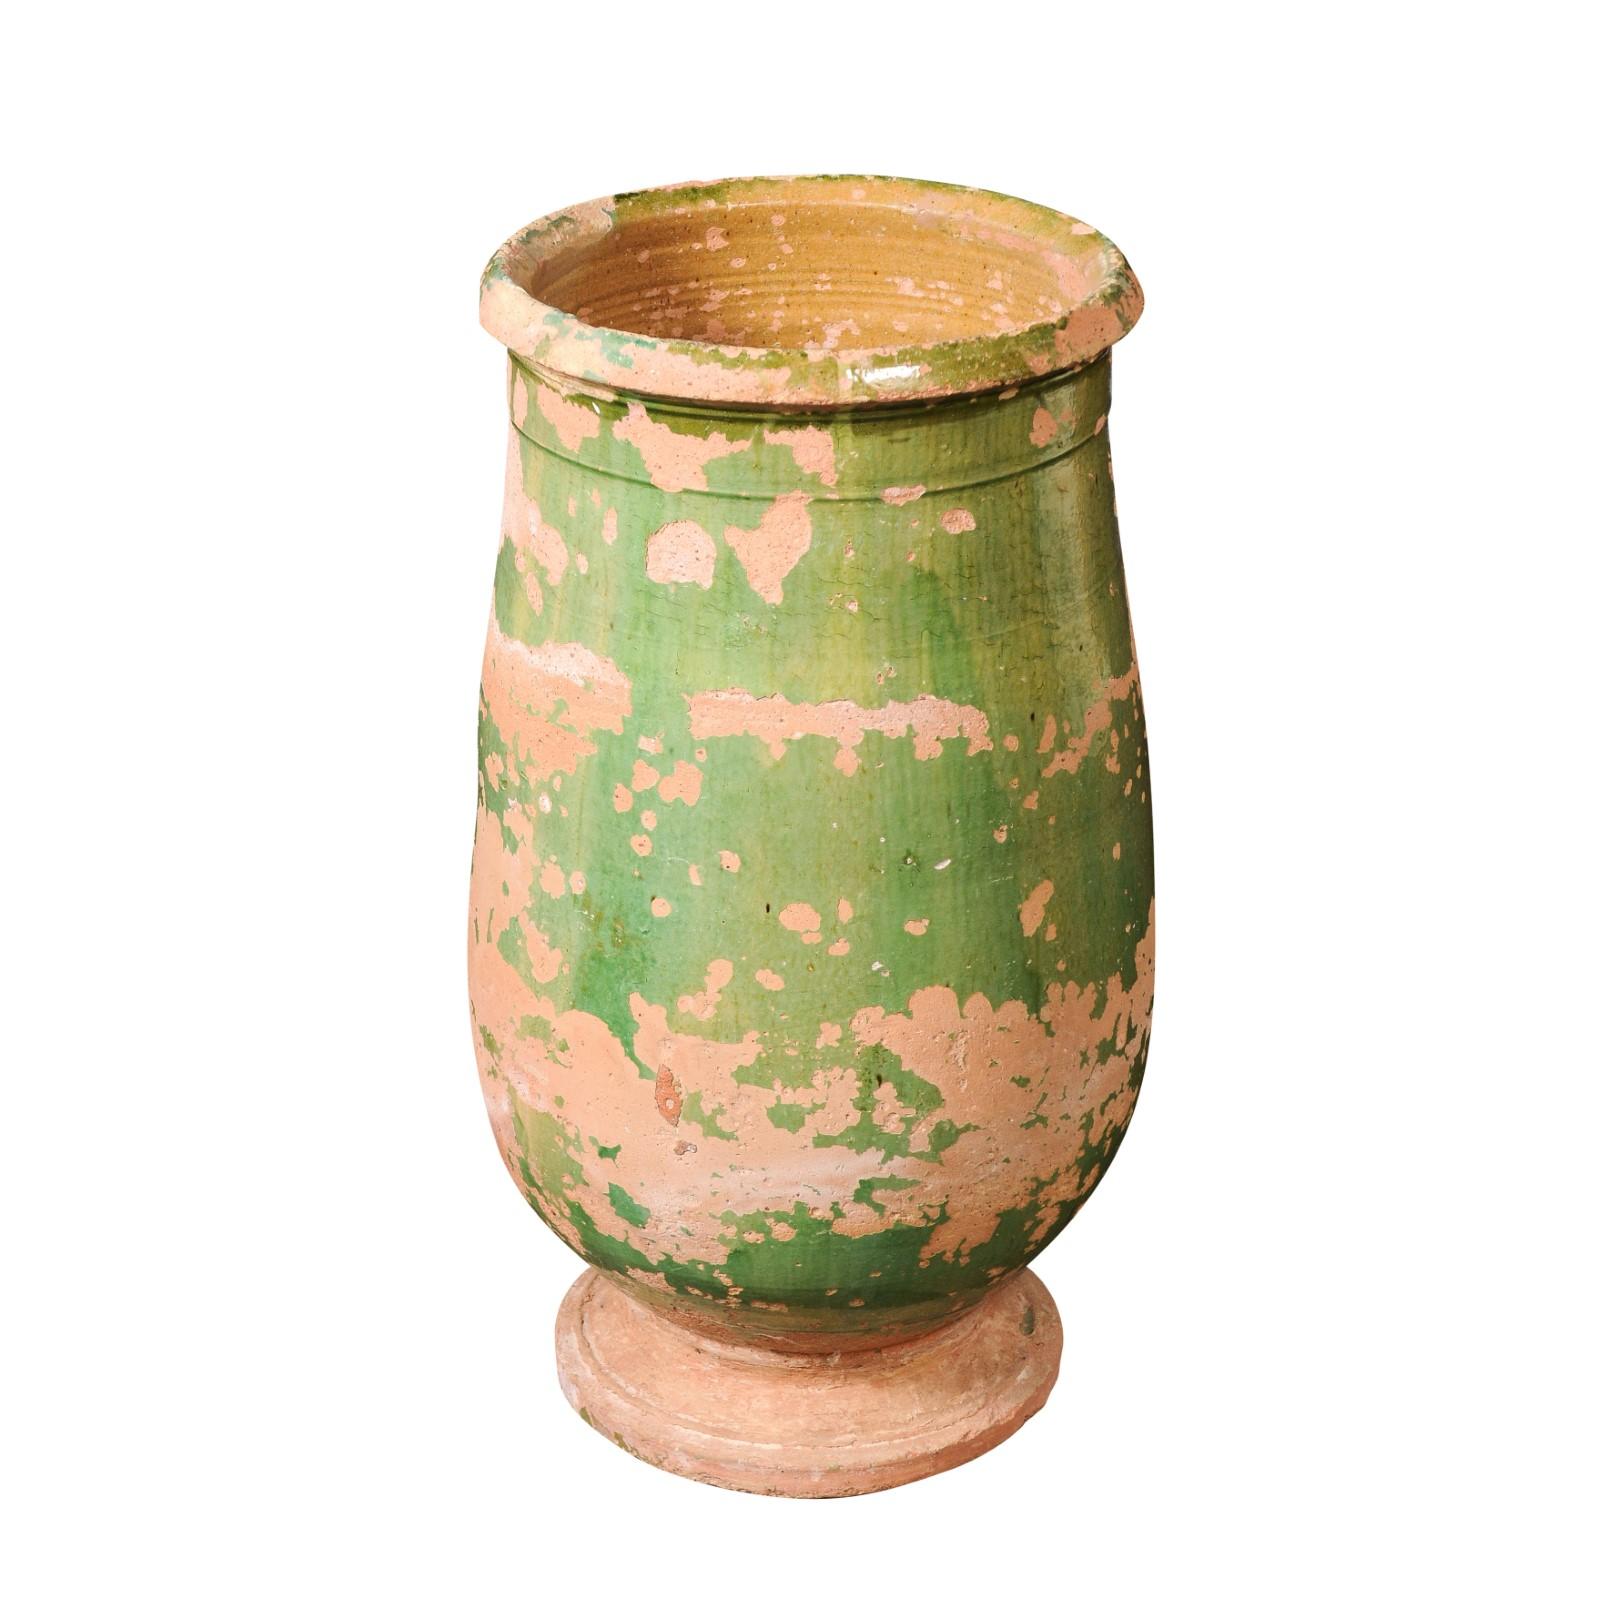 A French Provincial green glazed terracotta jar circa 1880 with oblong body, nicely weathered appearance and small base. Add a touch of rustic charm to your space with this exquisite French Provincial green glazed terracotta jar from the late 19th